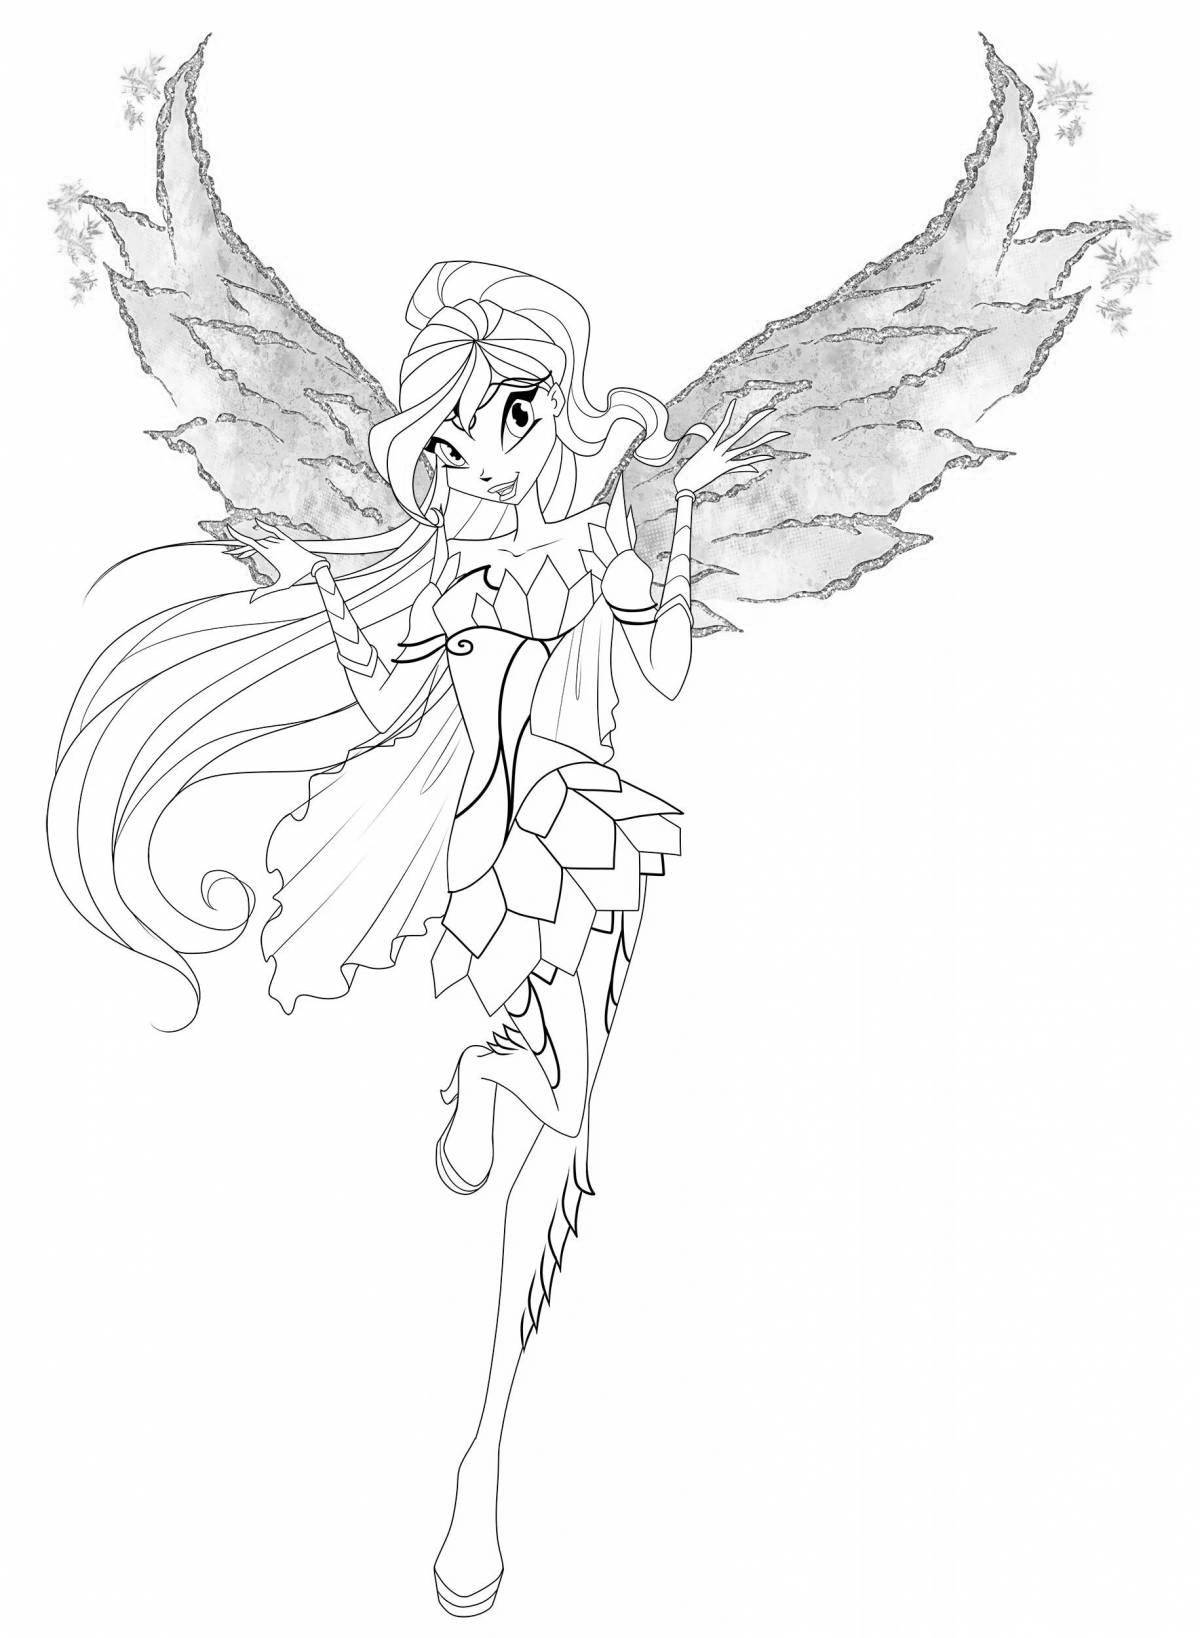 Playful bloomix coloring page